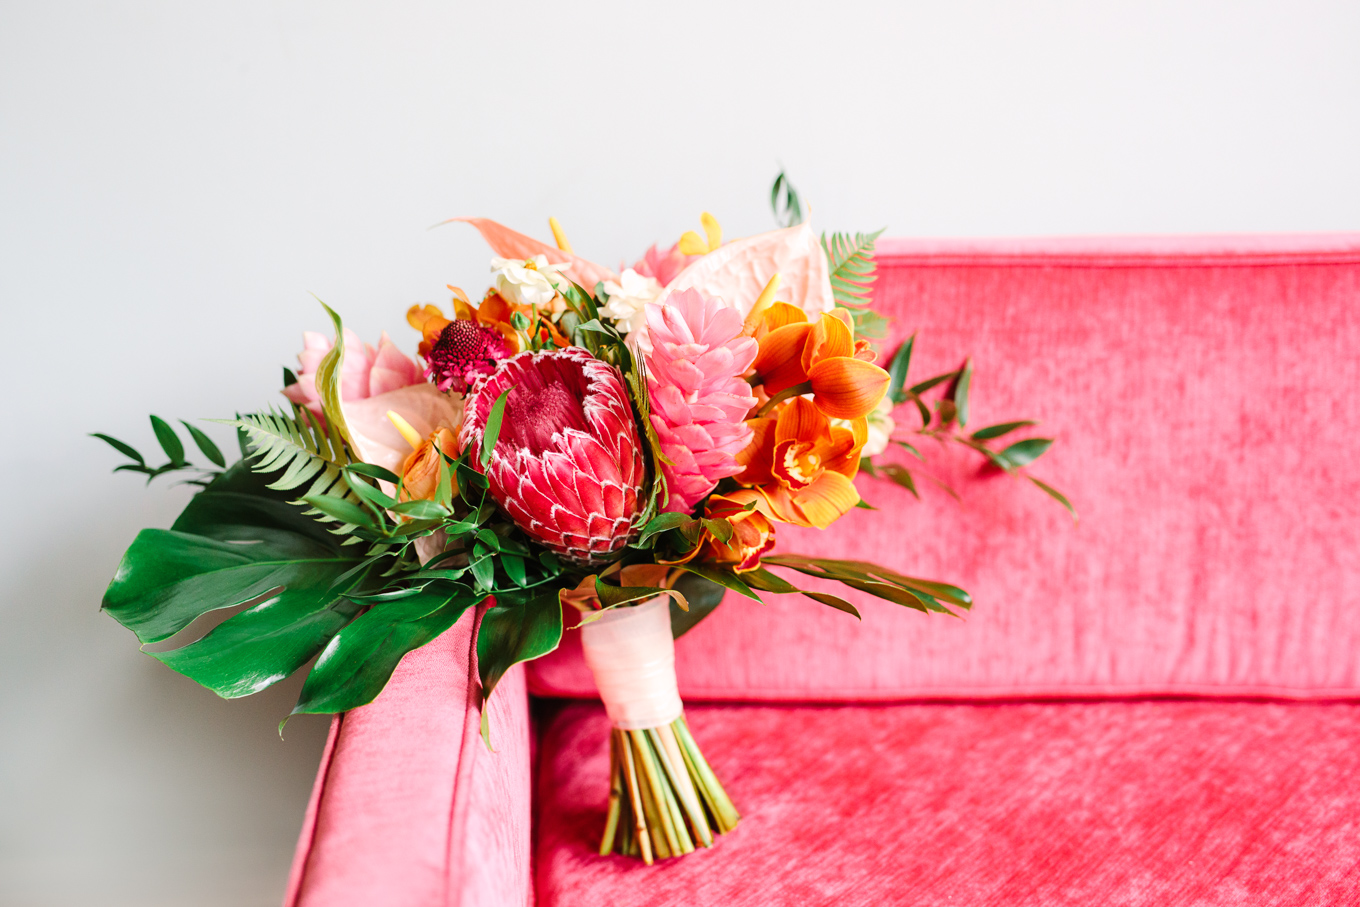 Tropical pink bouquet at The Fig House | Beautiful bridal bouquet inspiration and advice | Colorful and elevated wedding photography for fun-loving couples in Southern California | #weddingflowers #weddingbouquet #bridebouquet #bouquetideas #uniquebouquet   Source: Mary Costa Photography | Los Angeles